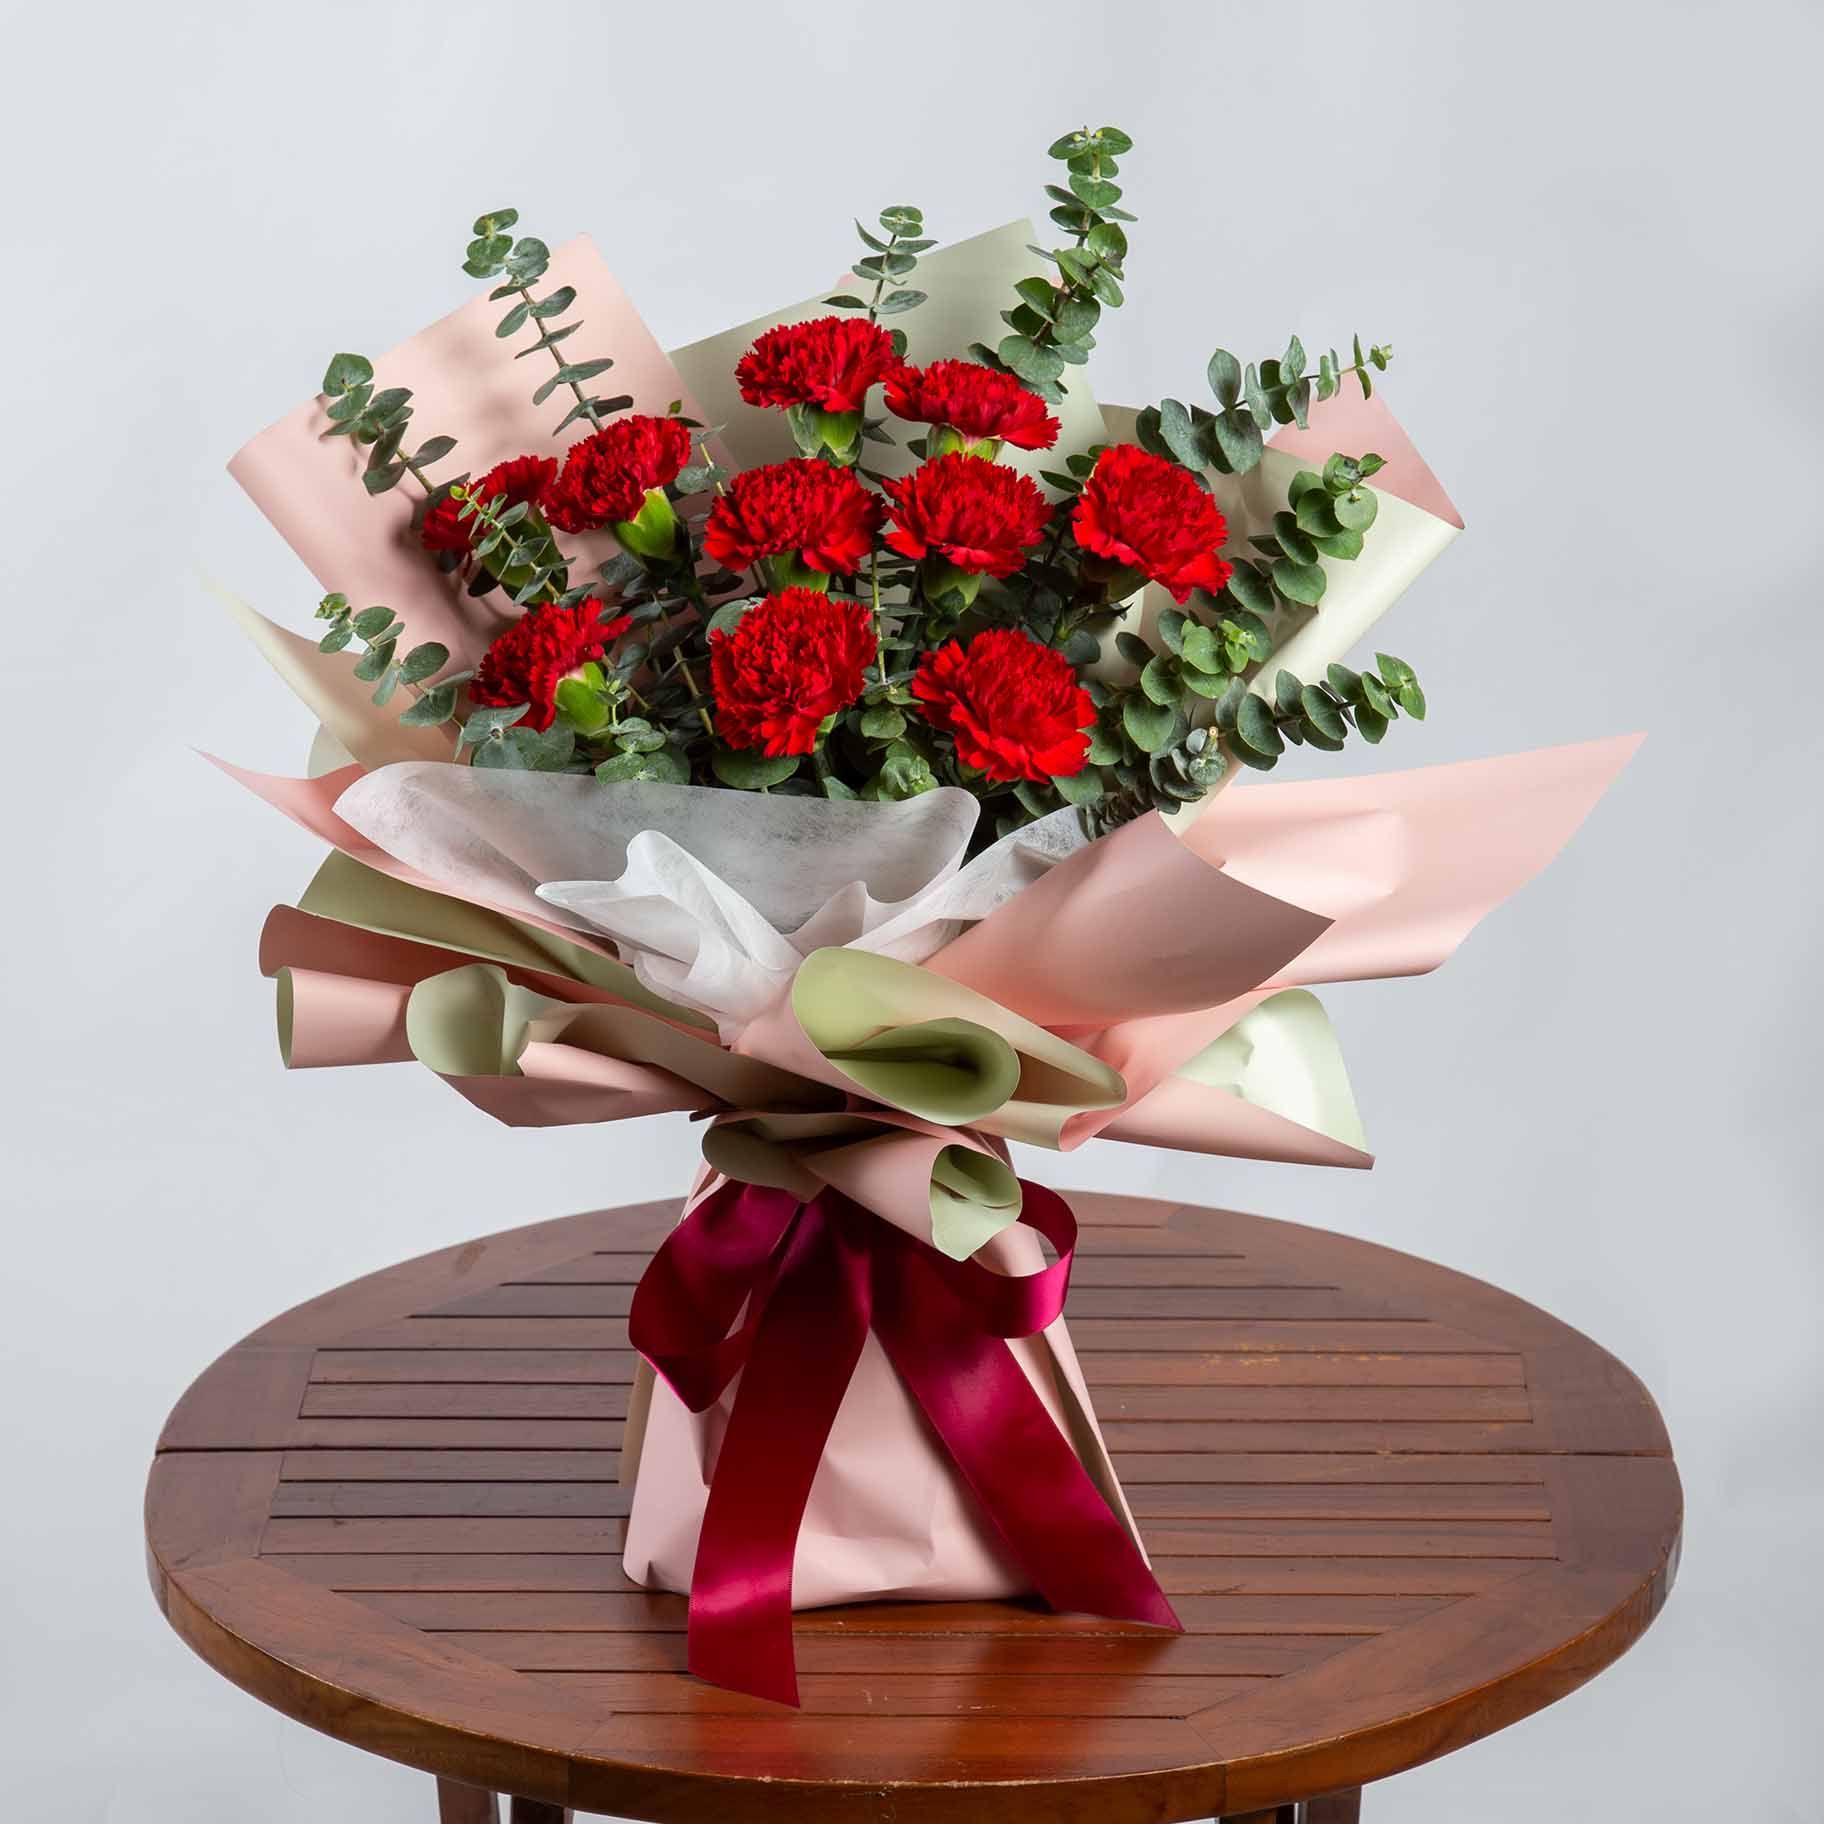 Top 5 Flowers to Thank Your Loved One